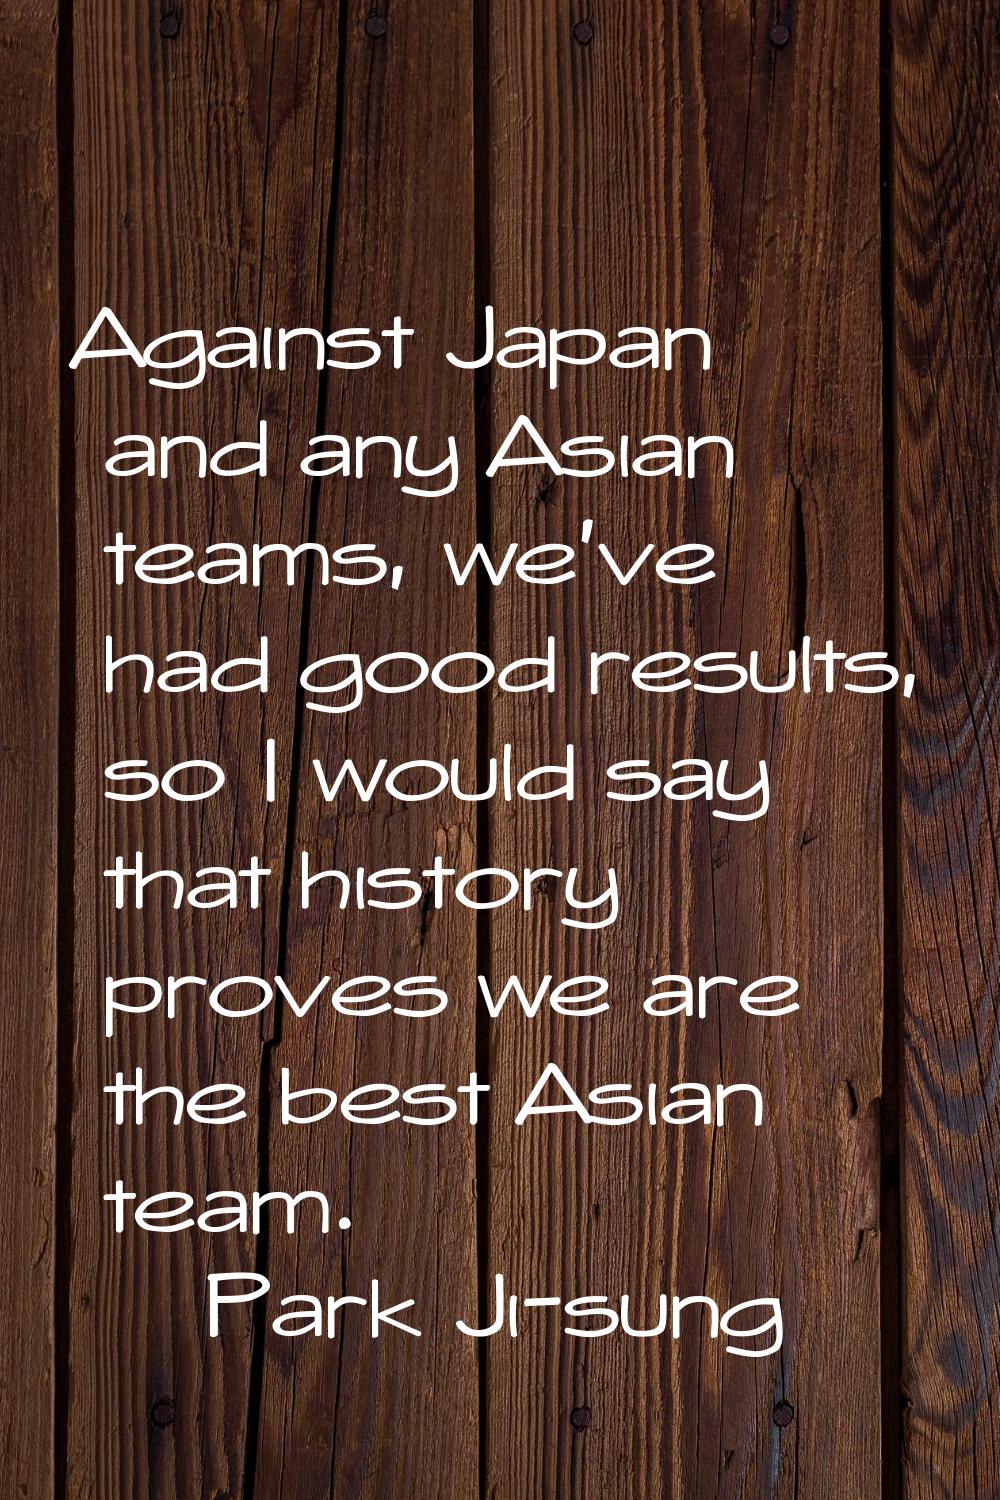 Against Japan and any Asian teams, we've had good results, so I would say that history proves we ar